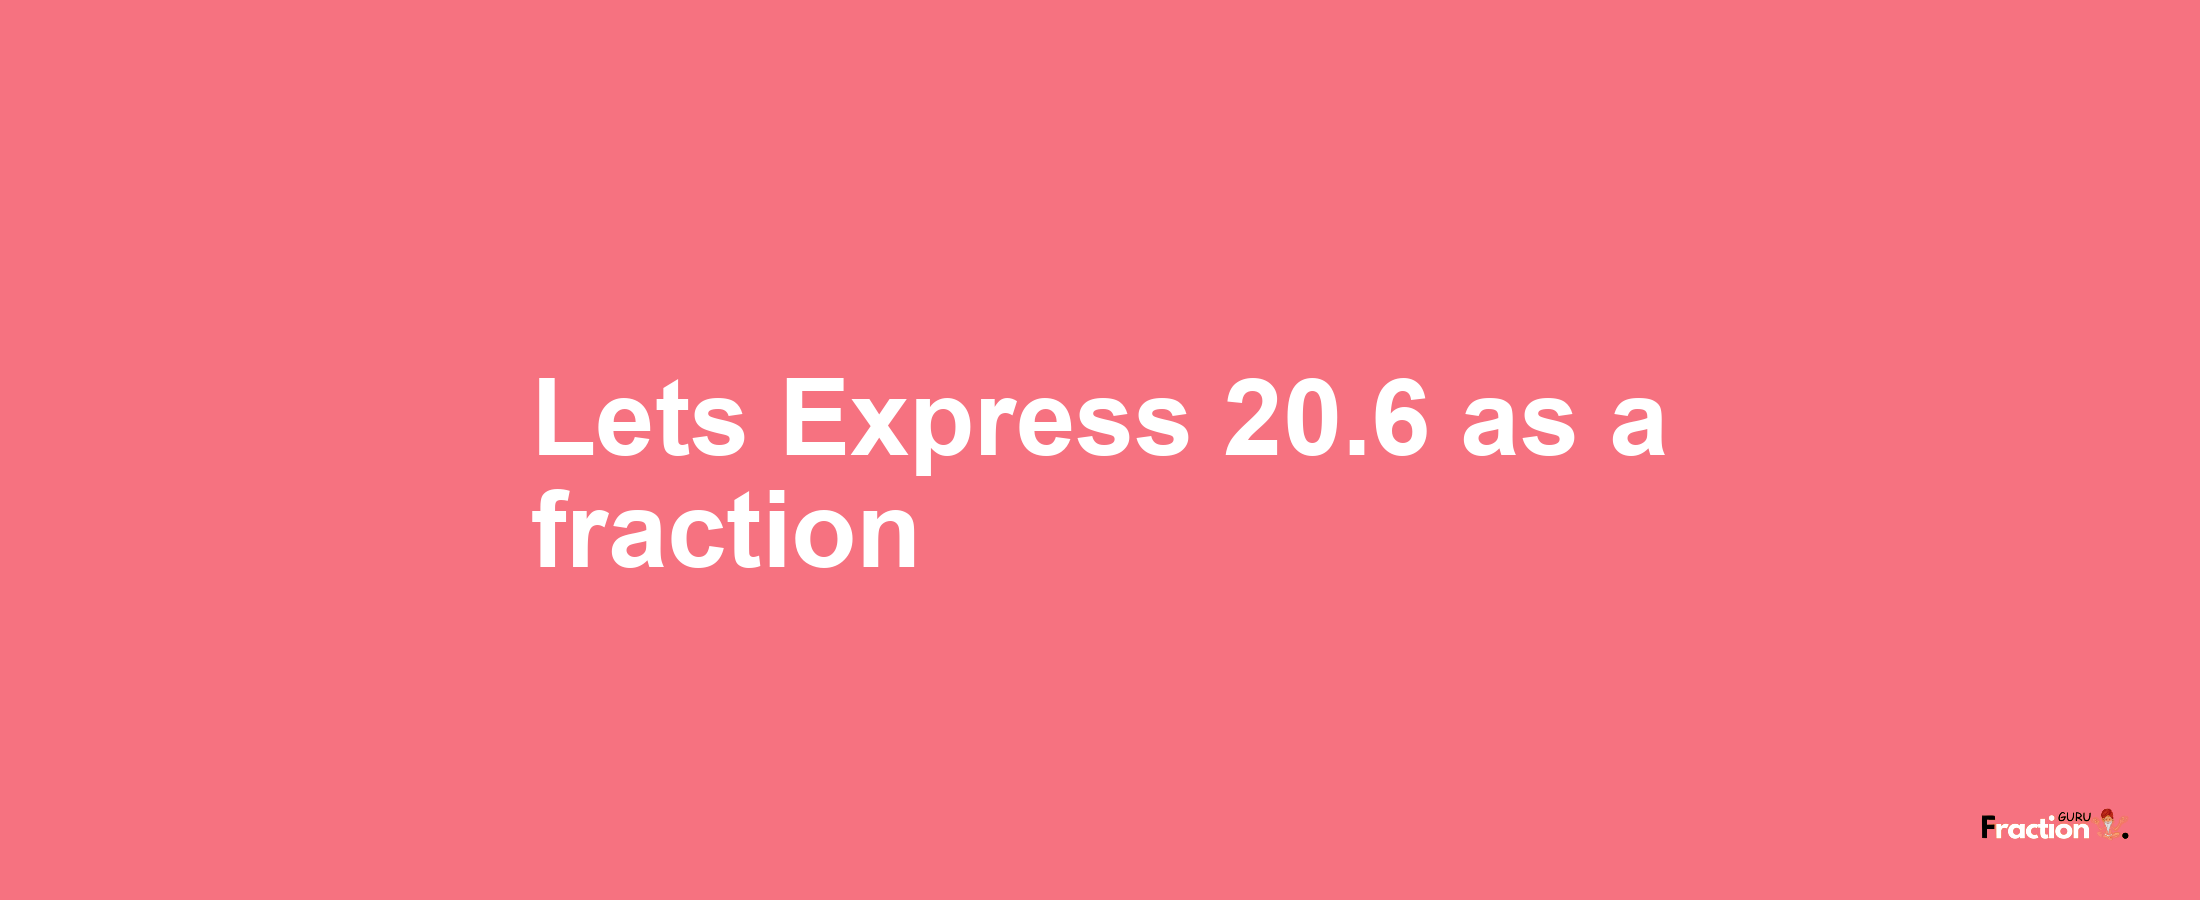 Lets Express 20.6 as afraction